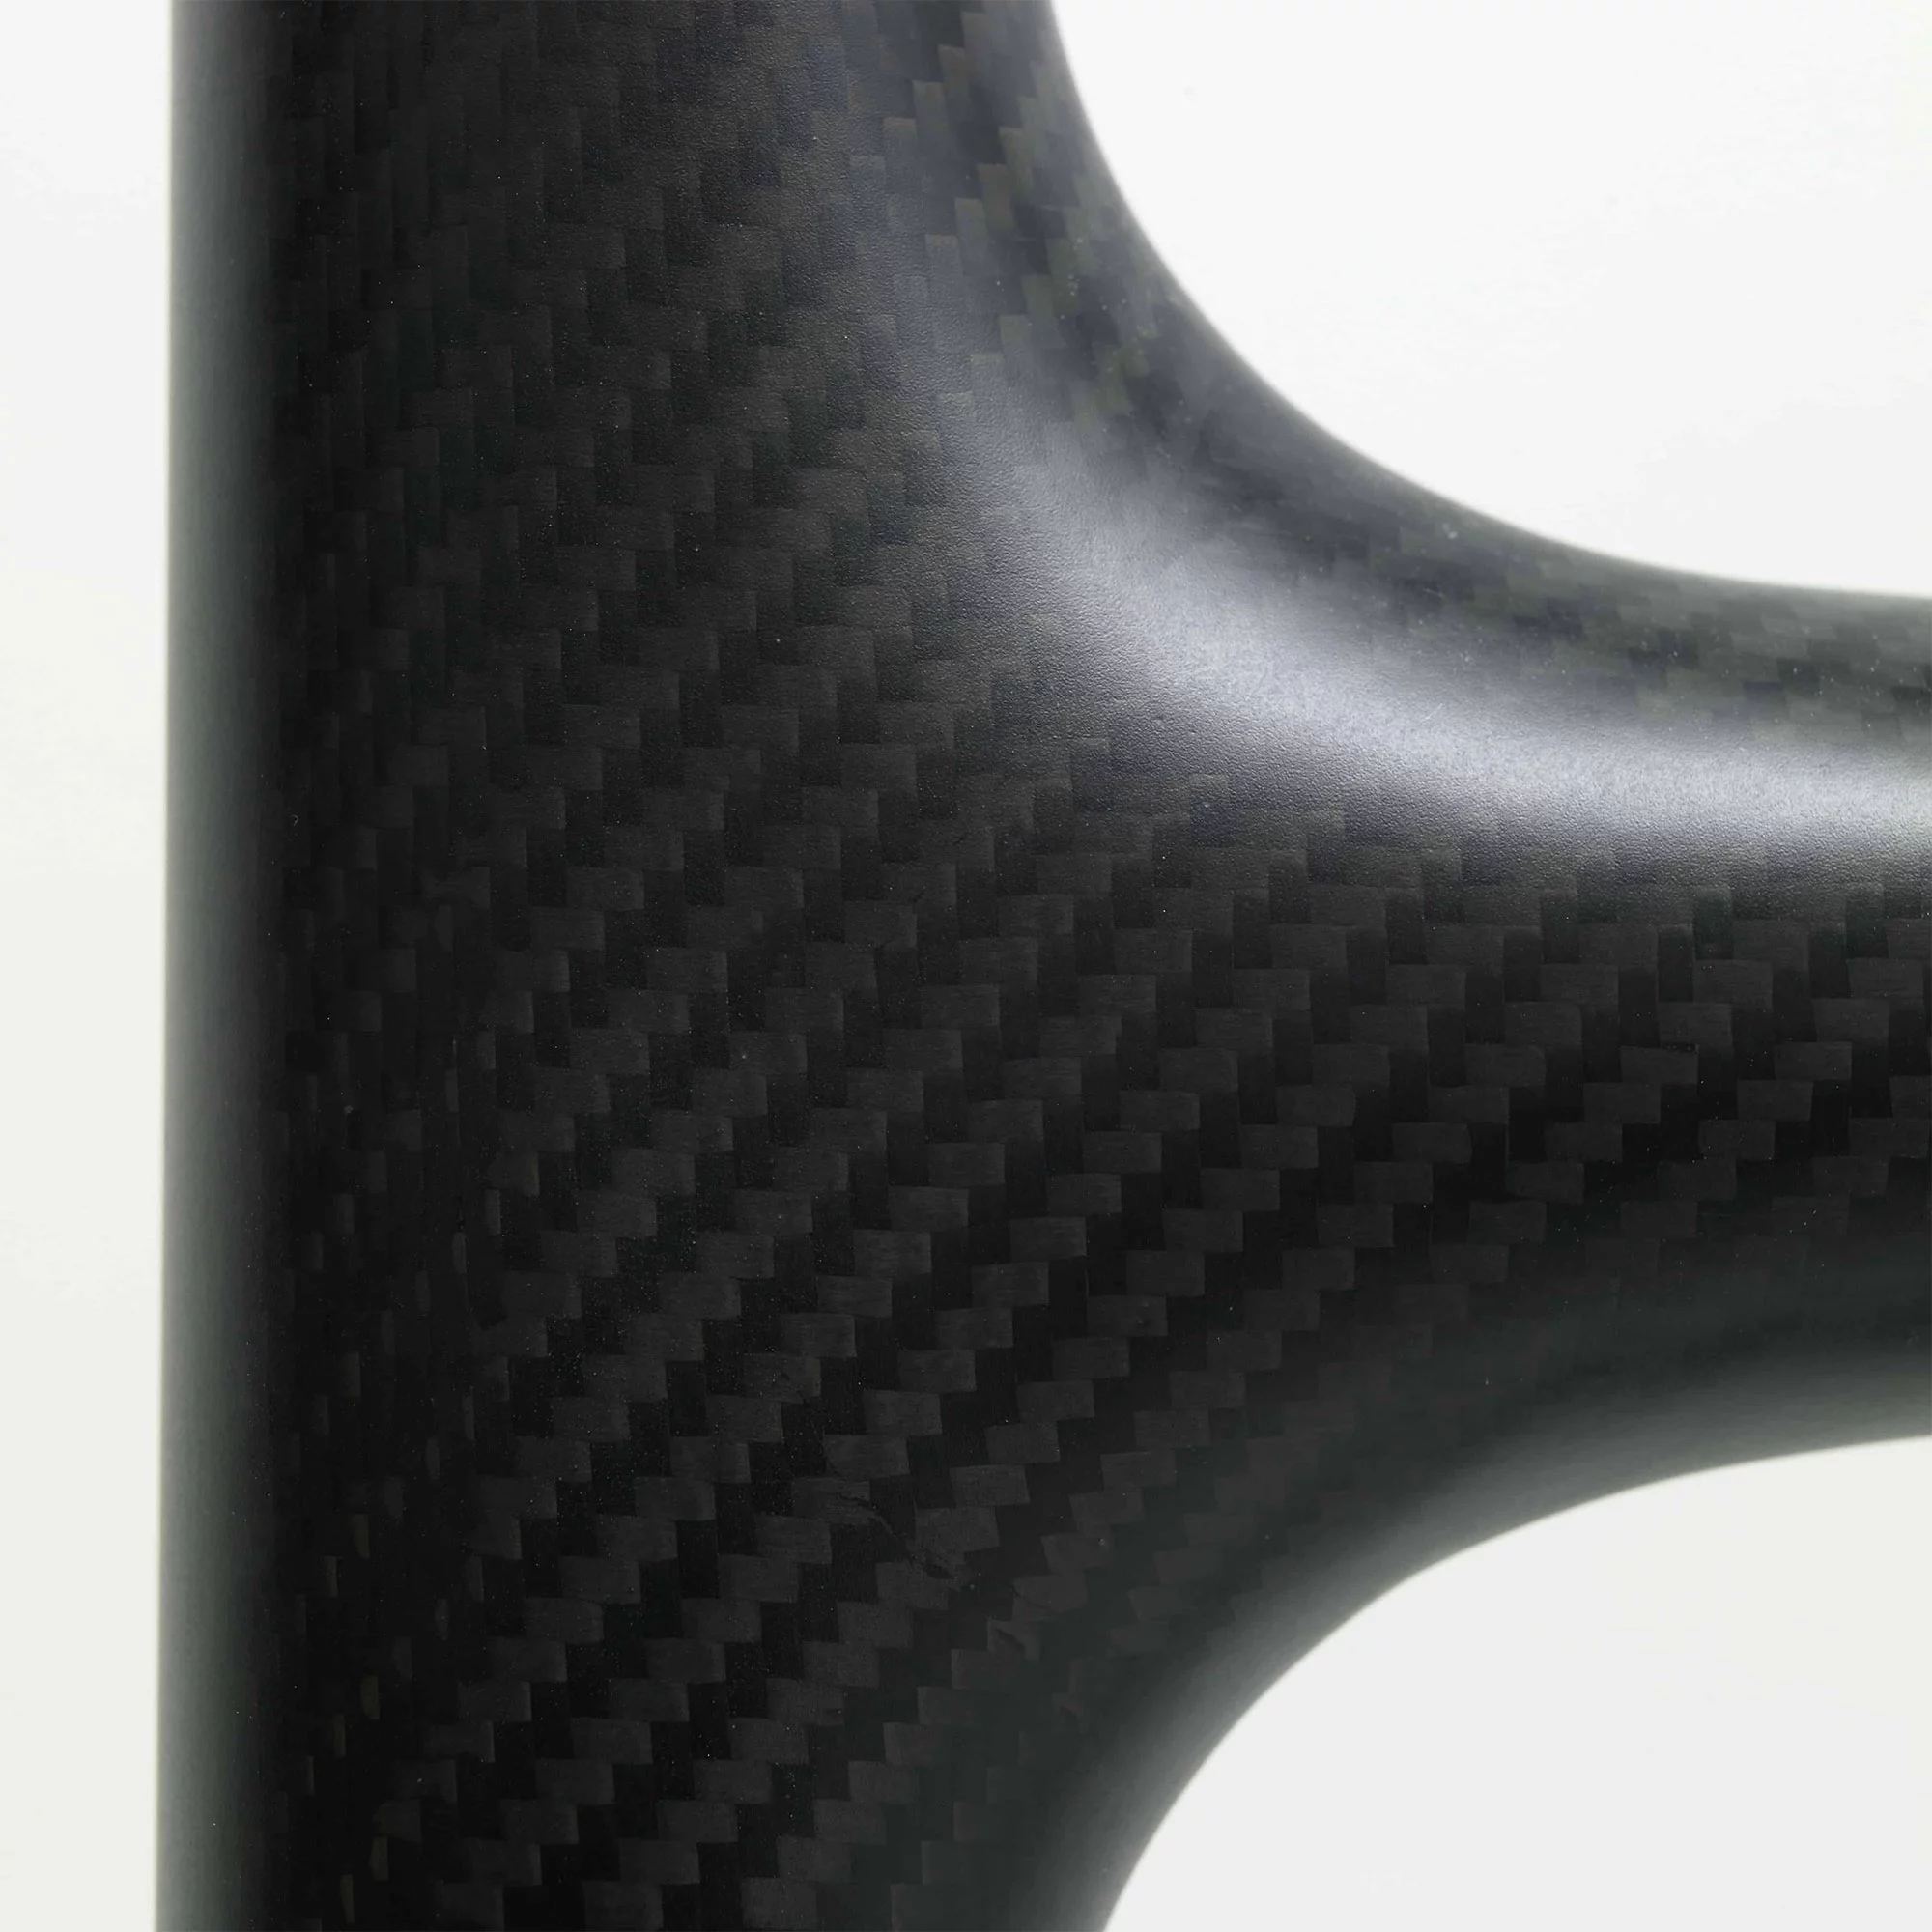 Carbon Ladder - Marc Newson - Miscellaneous - Galerie kreo